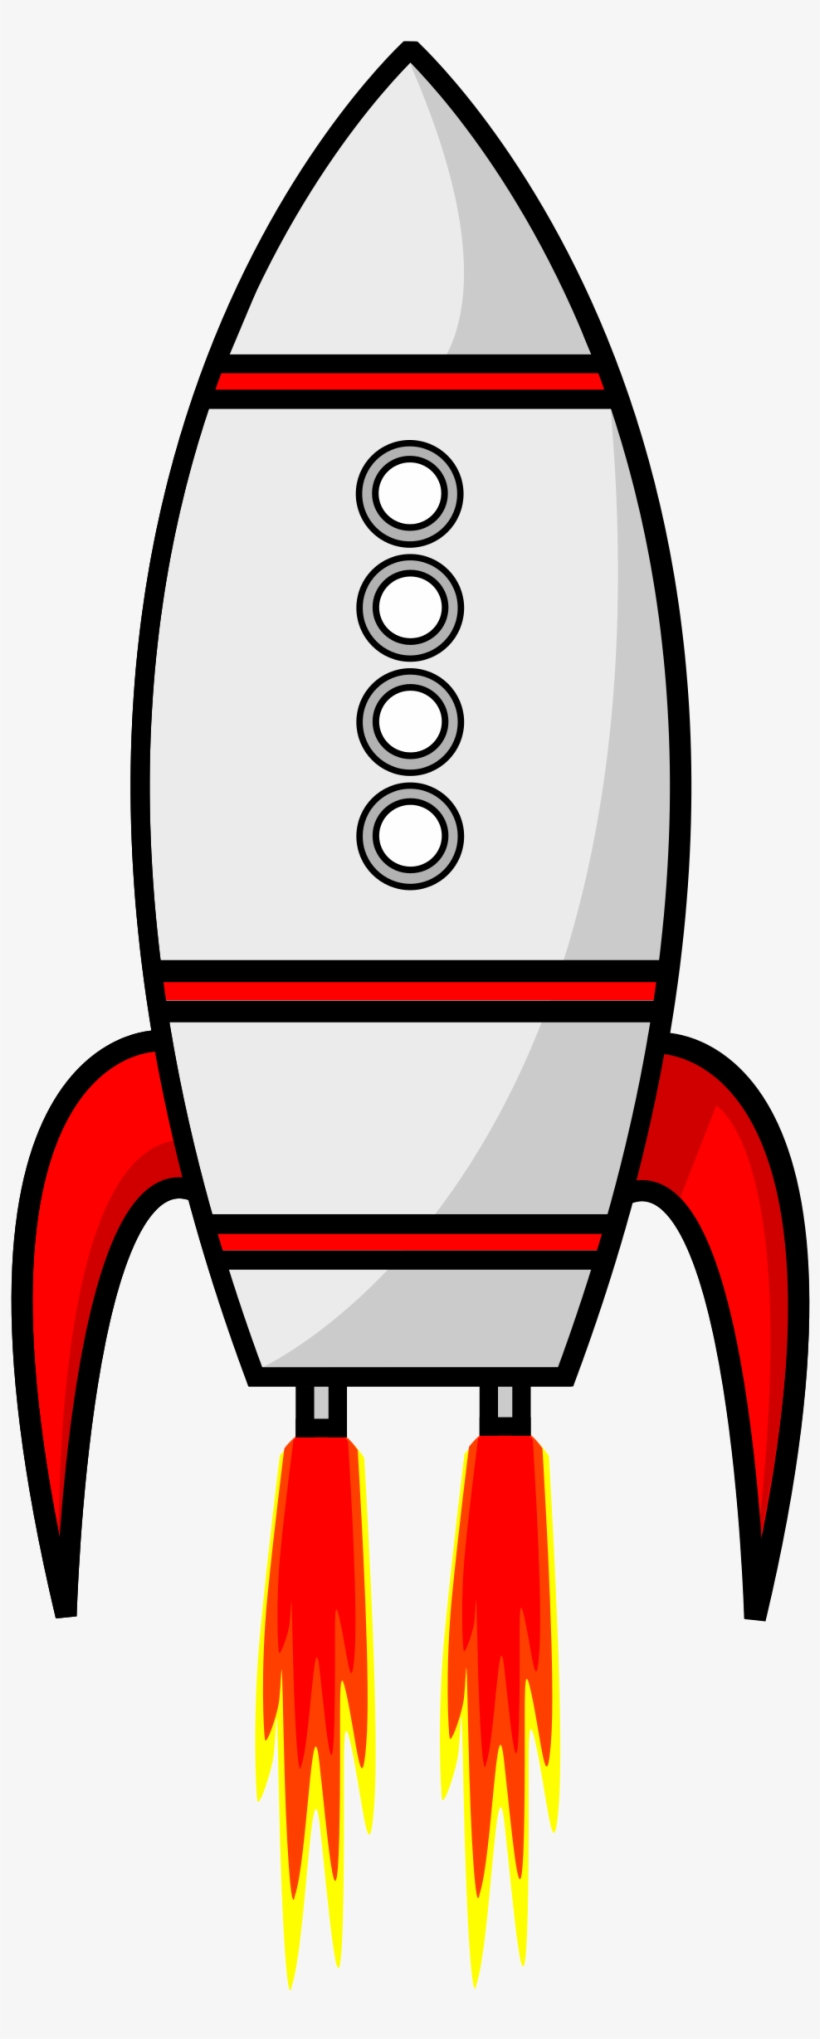 This Free Icons Png Design Of Cartoon Moon Rocket Remix, transparent png #1318952